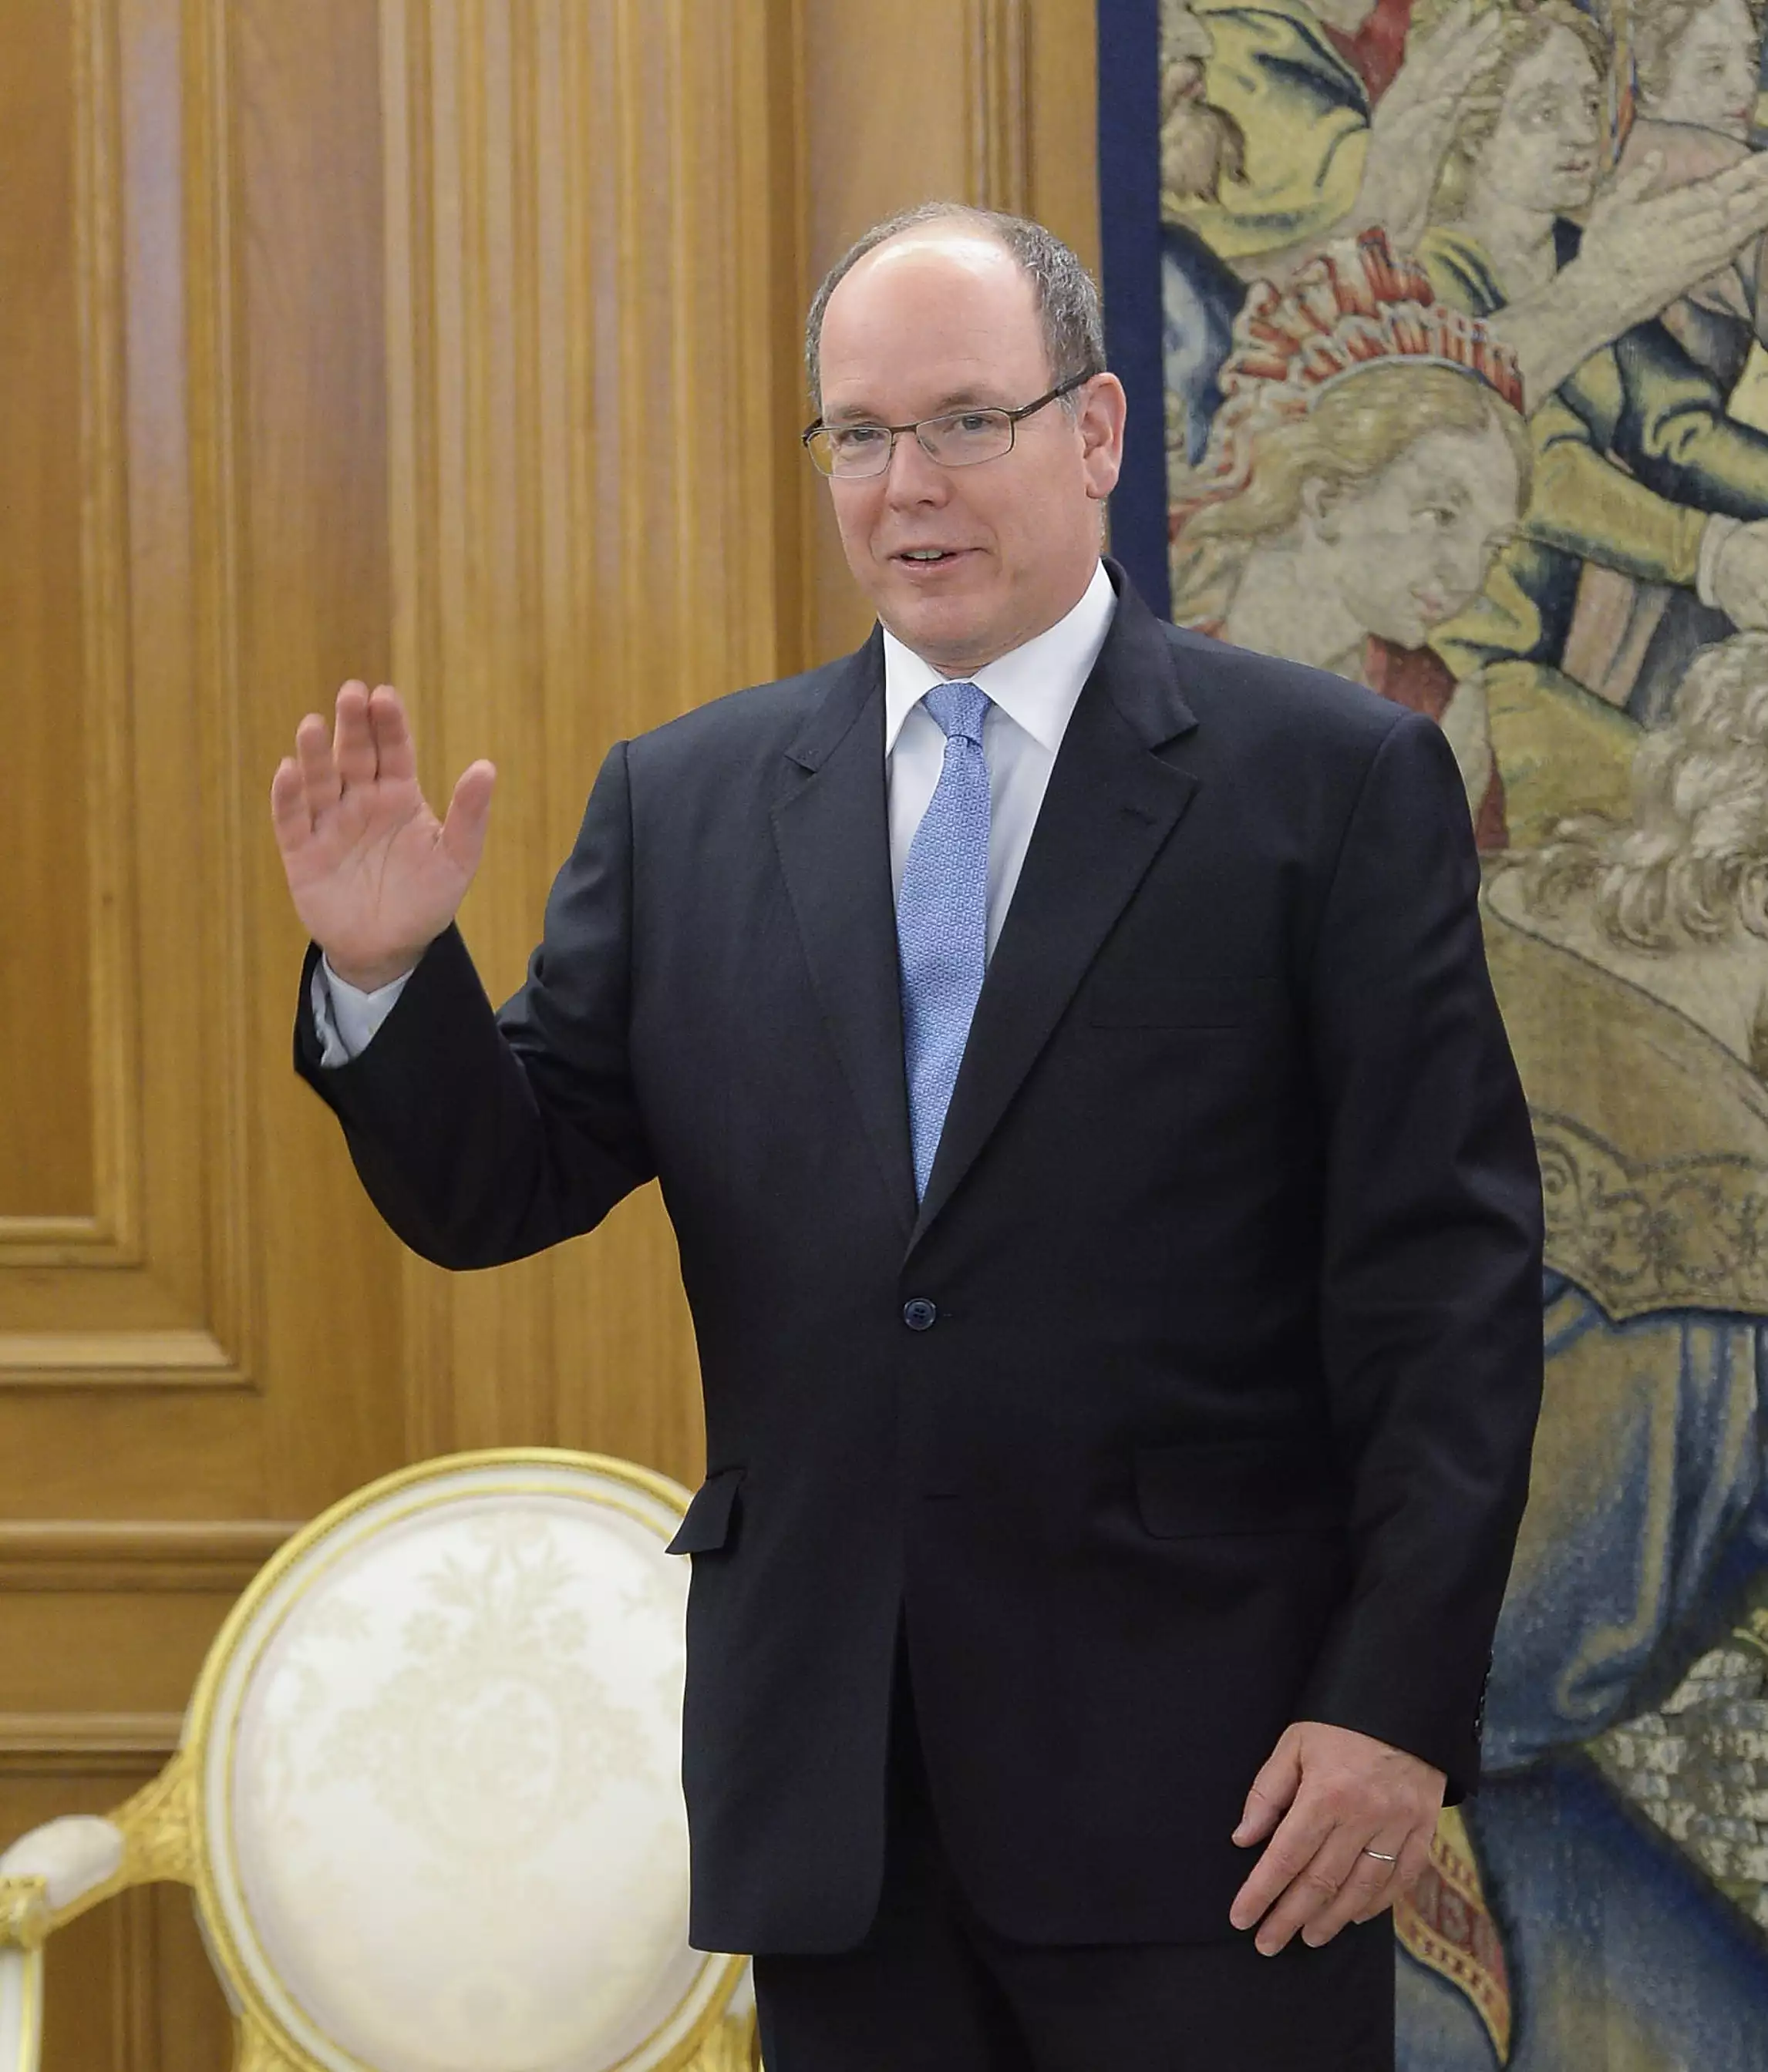 Prince Albert II of Monaco waving at a state function